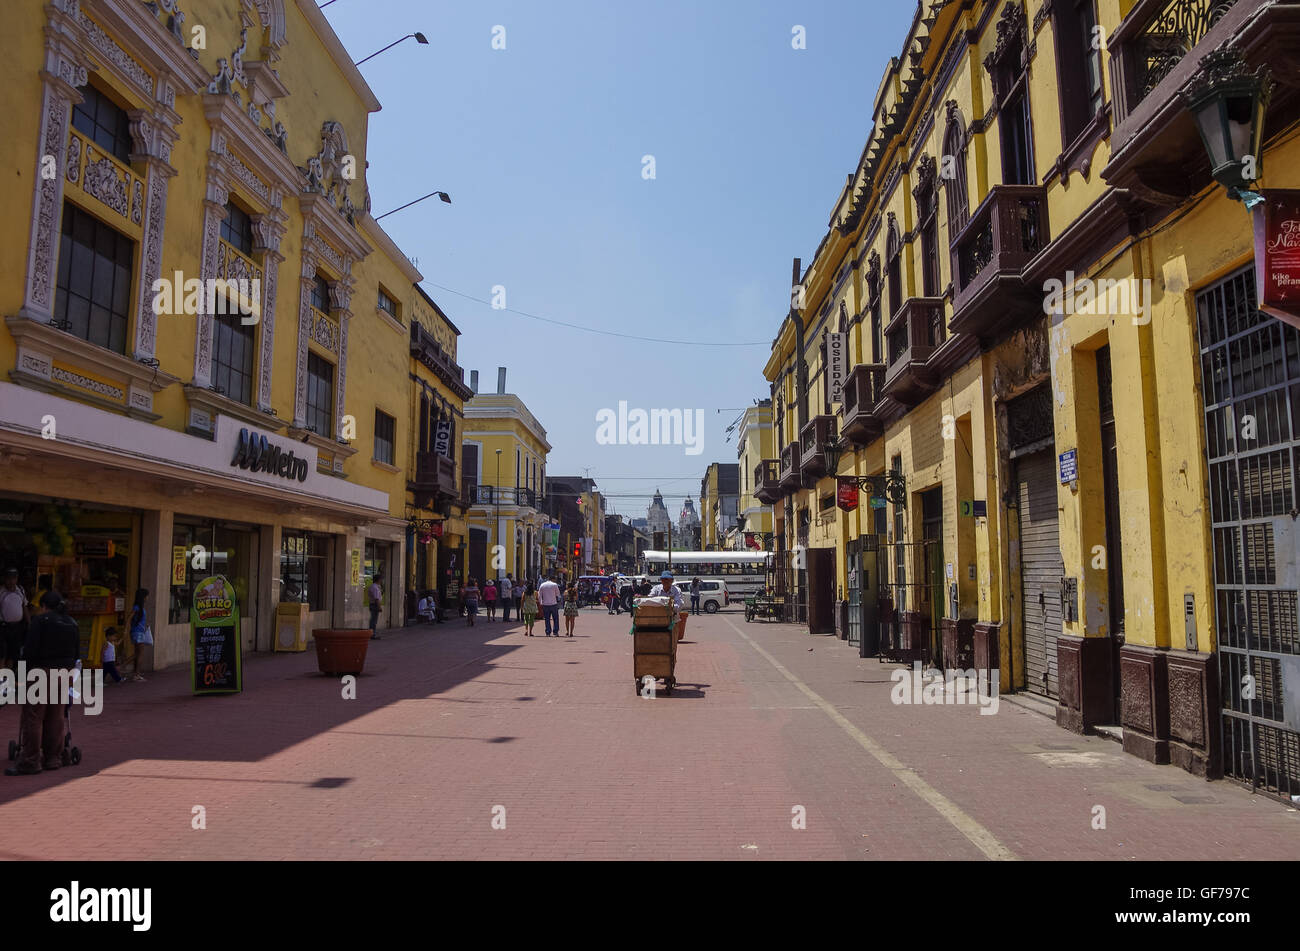 Lima, Peru -December 31, 2013: Street view of Lima old town with traditional colorful houses and wooden balcony. Stock Photo